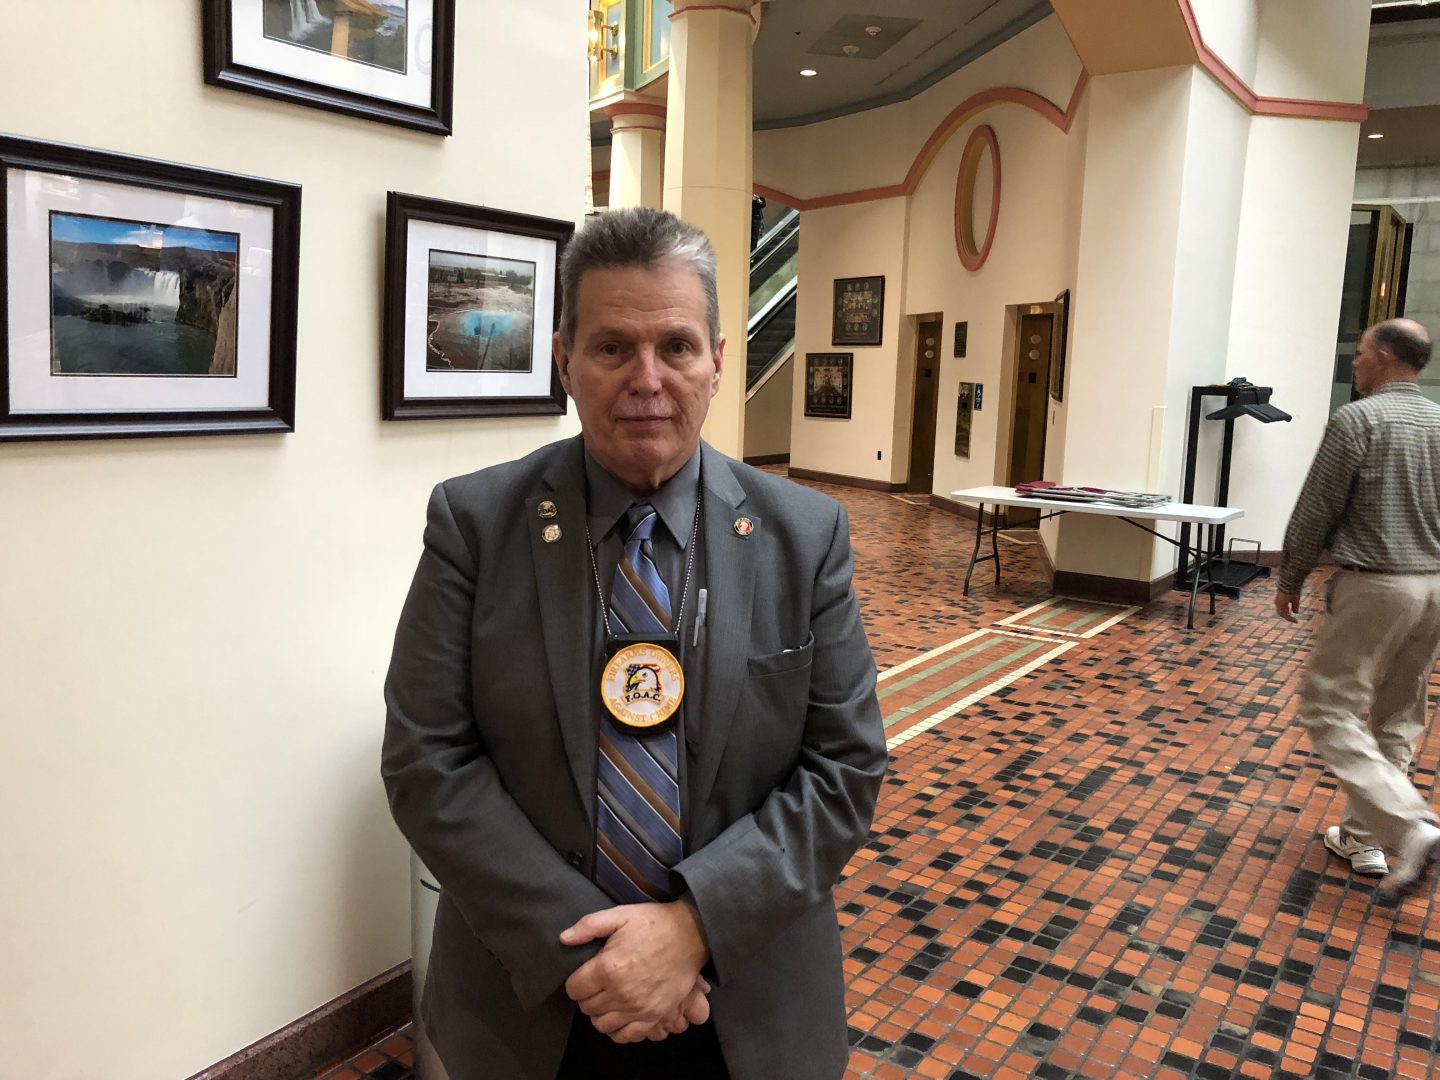 Kim Stolfer, president of Firearms Owners Against Crime, was at the state Capitol on Monday, Sept. 24, 2018, to lobby against two gun bills.